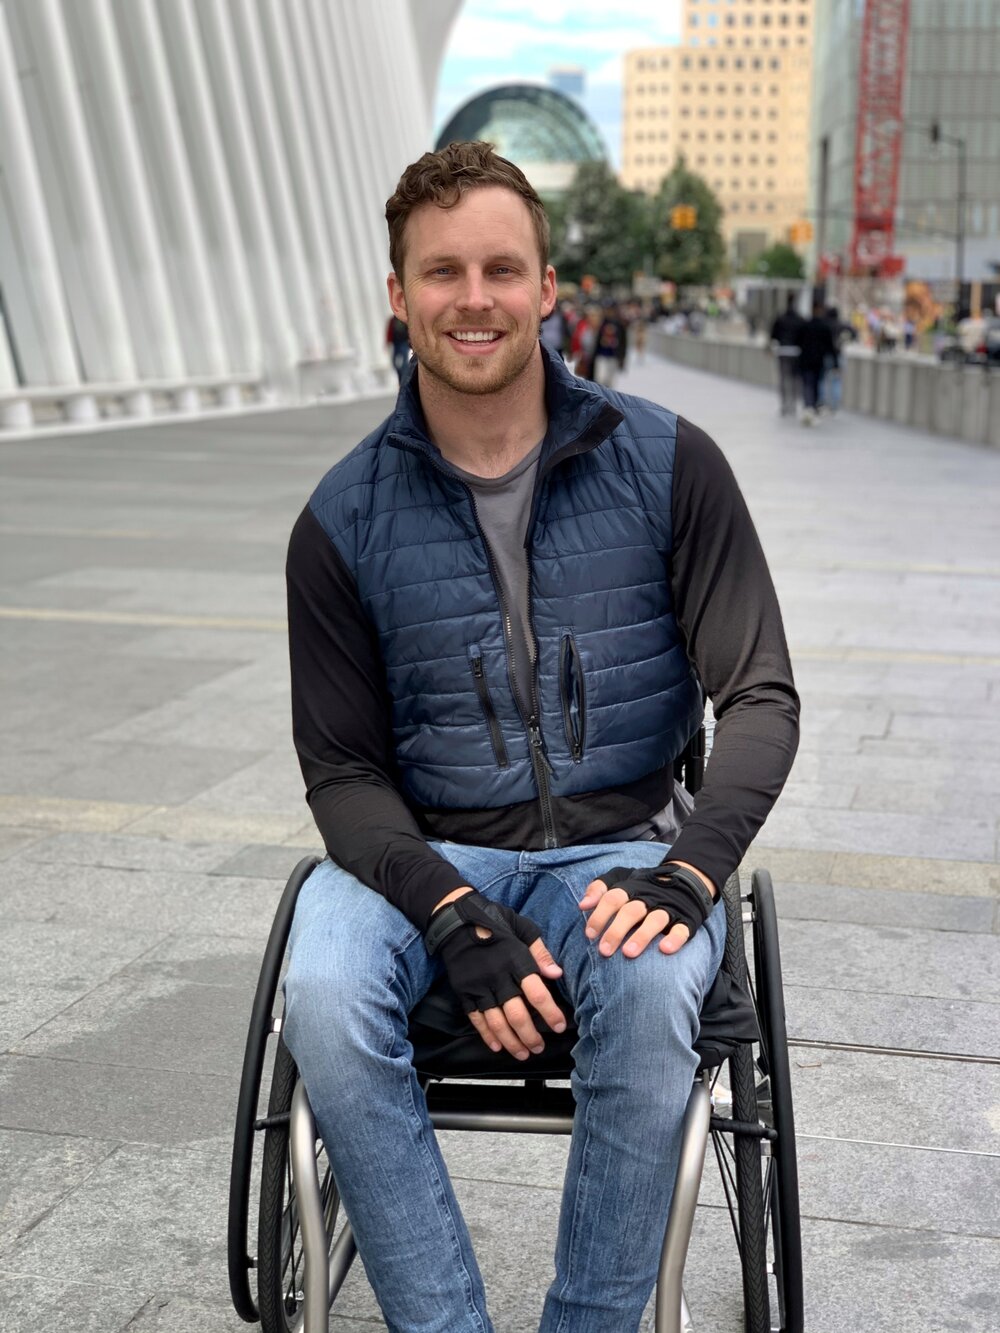 Carson is sitting in his wheelchair on the sidewalk by the Oculus Building in New York, smiling and looking at the camera. He is wearing a blue puffy jacket with black sleeves, a grey shirt, jeans, and fingerless gloves. Carson is a white man with light brown hair.